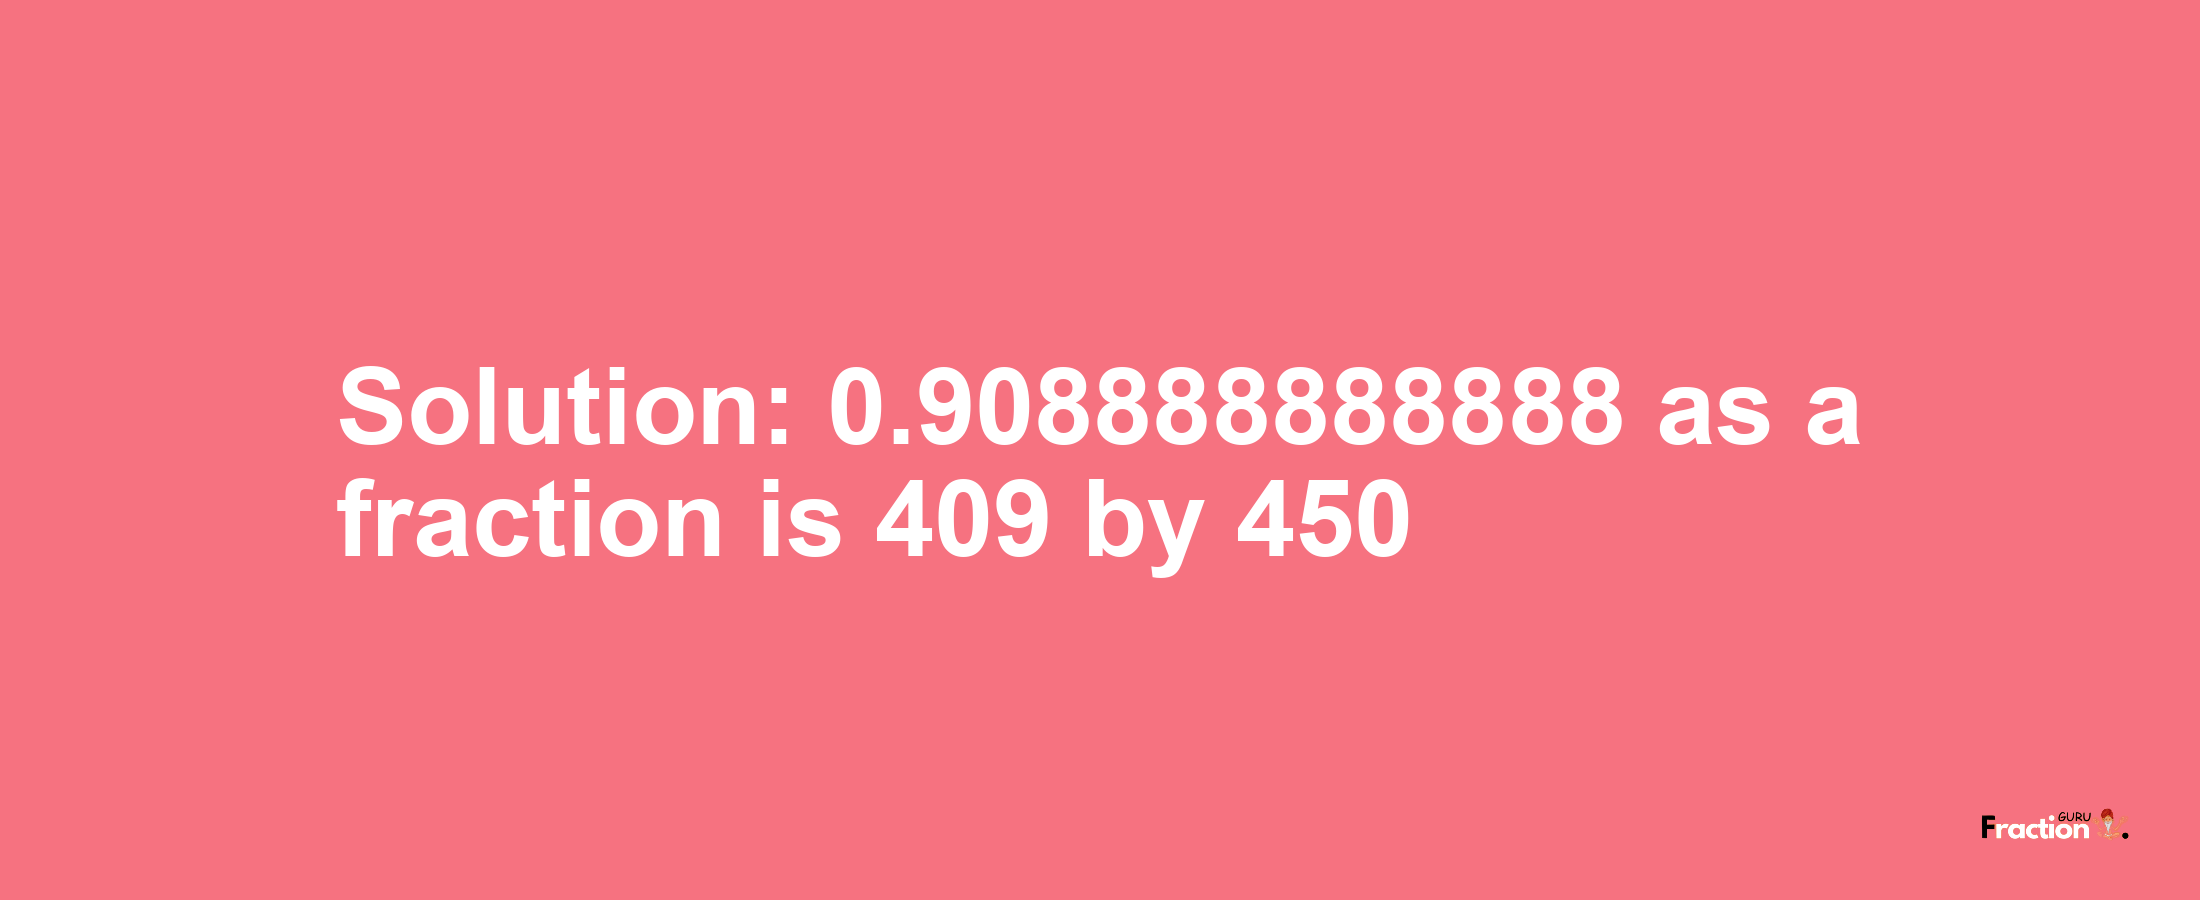 Solution:0.908888888888 as a fraction is 409/450